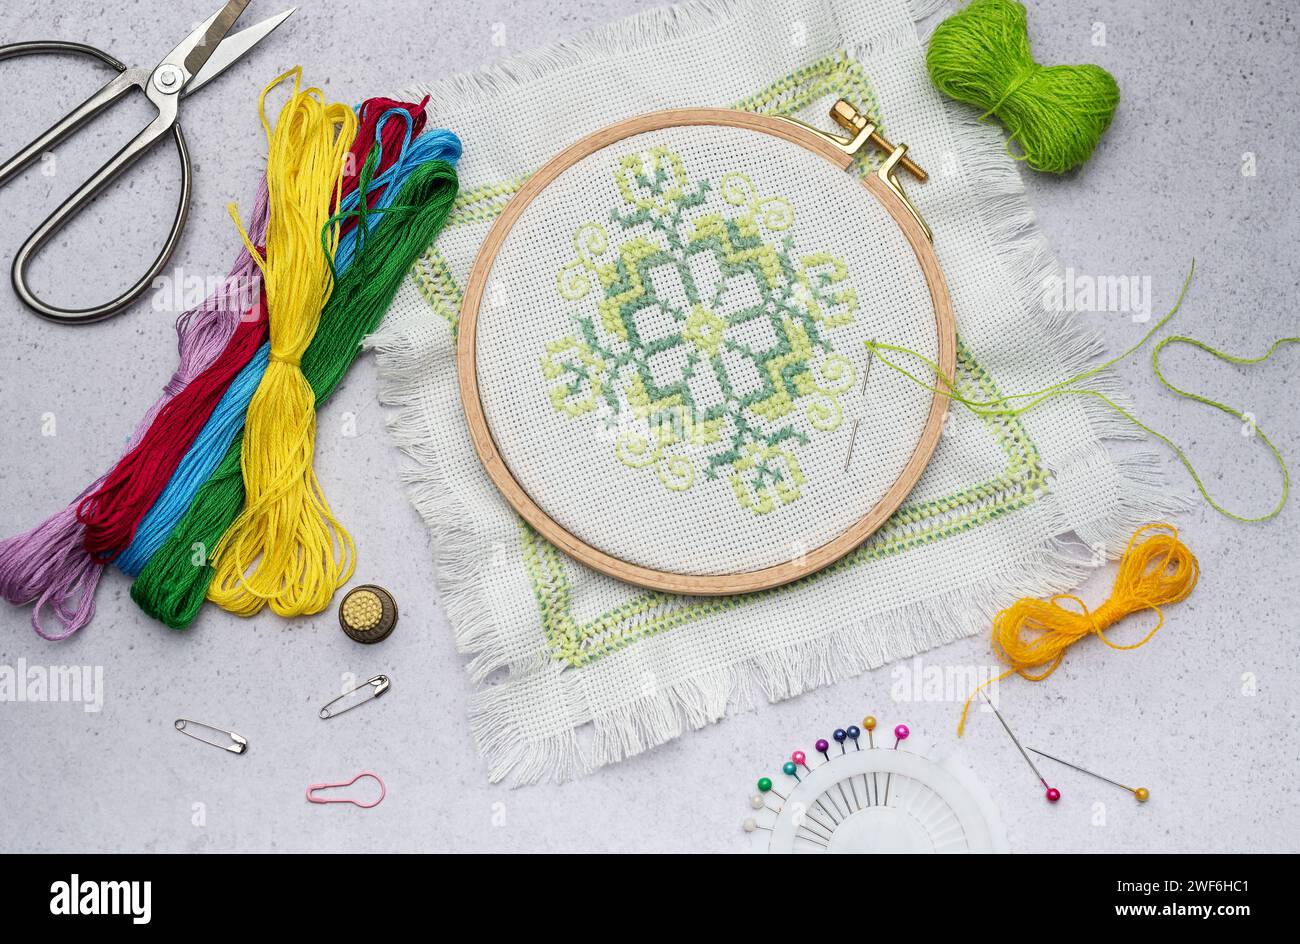 Embroidery with colored threads and various sewing accessories on the table Stock Photo